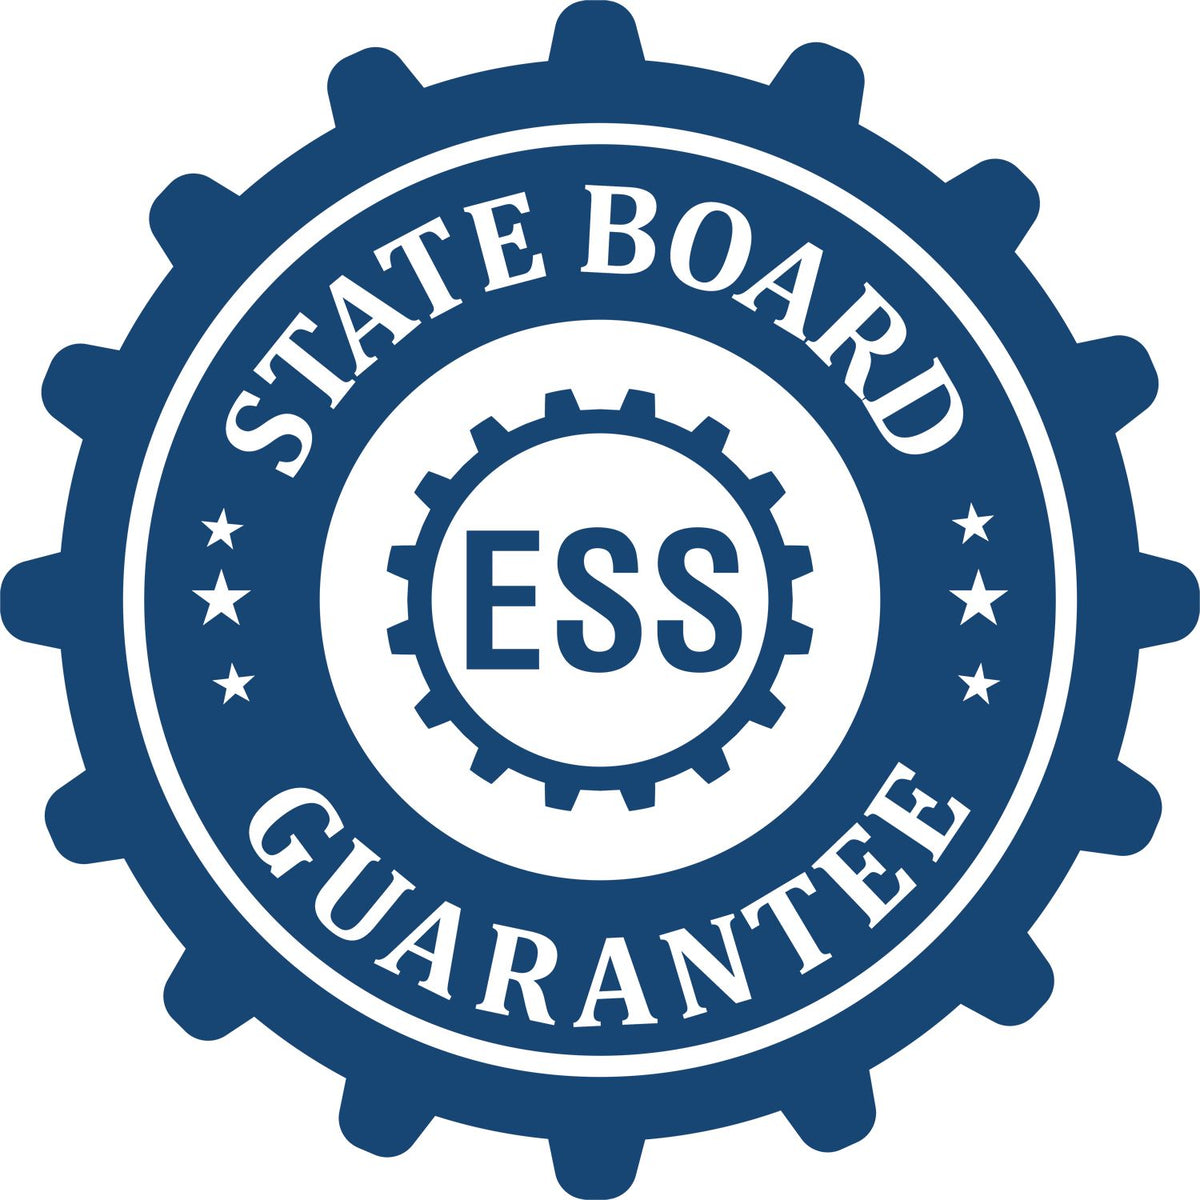 An emblem in a gear shape illustrating a state board guarantee for the Heavy-Duty Vermont Rectangular Notary Stamp product.